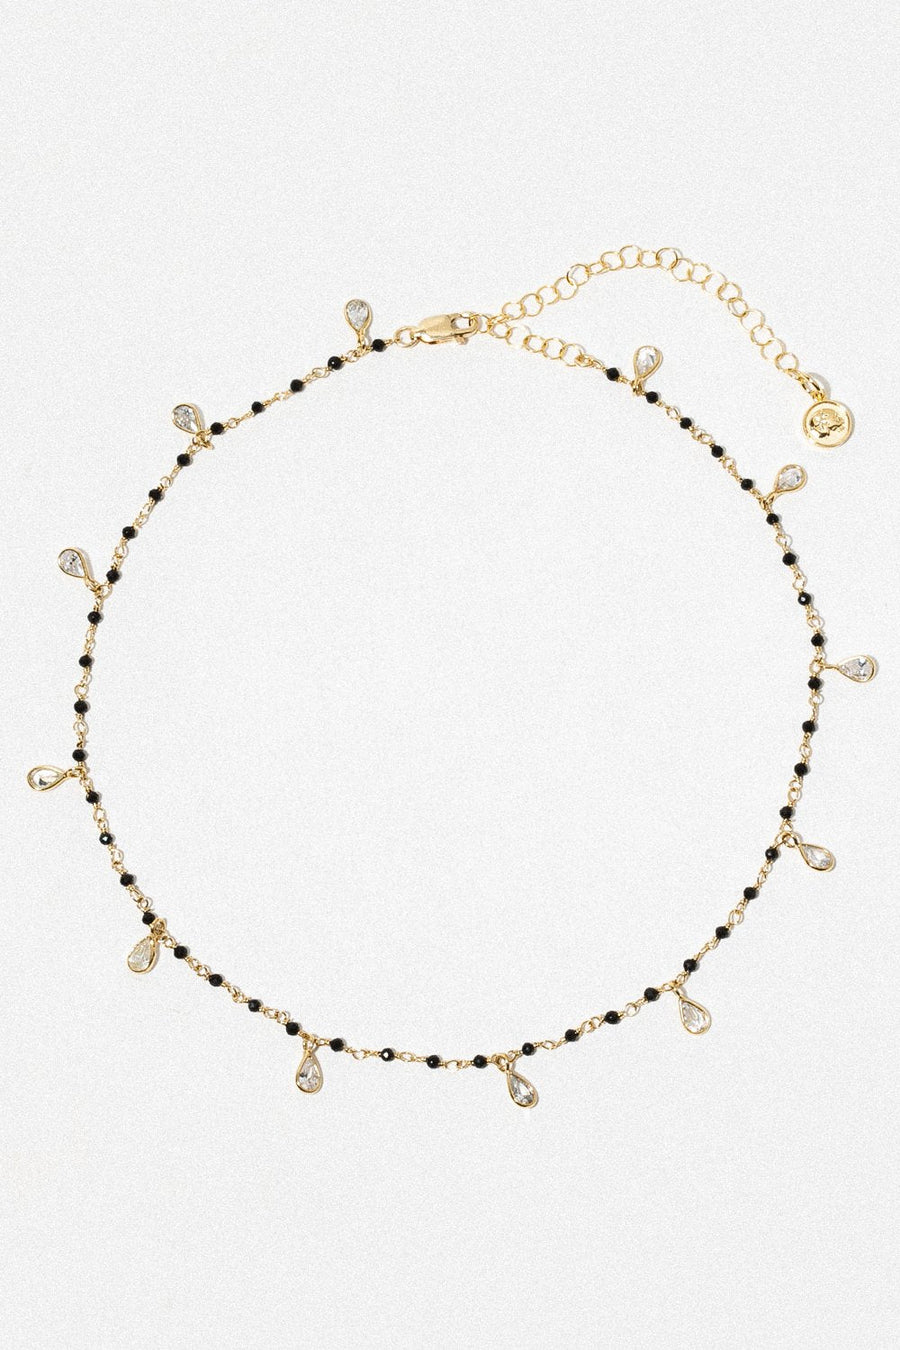 Goddess Jewelry Gold / 12 Inches Dylan Choker